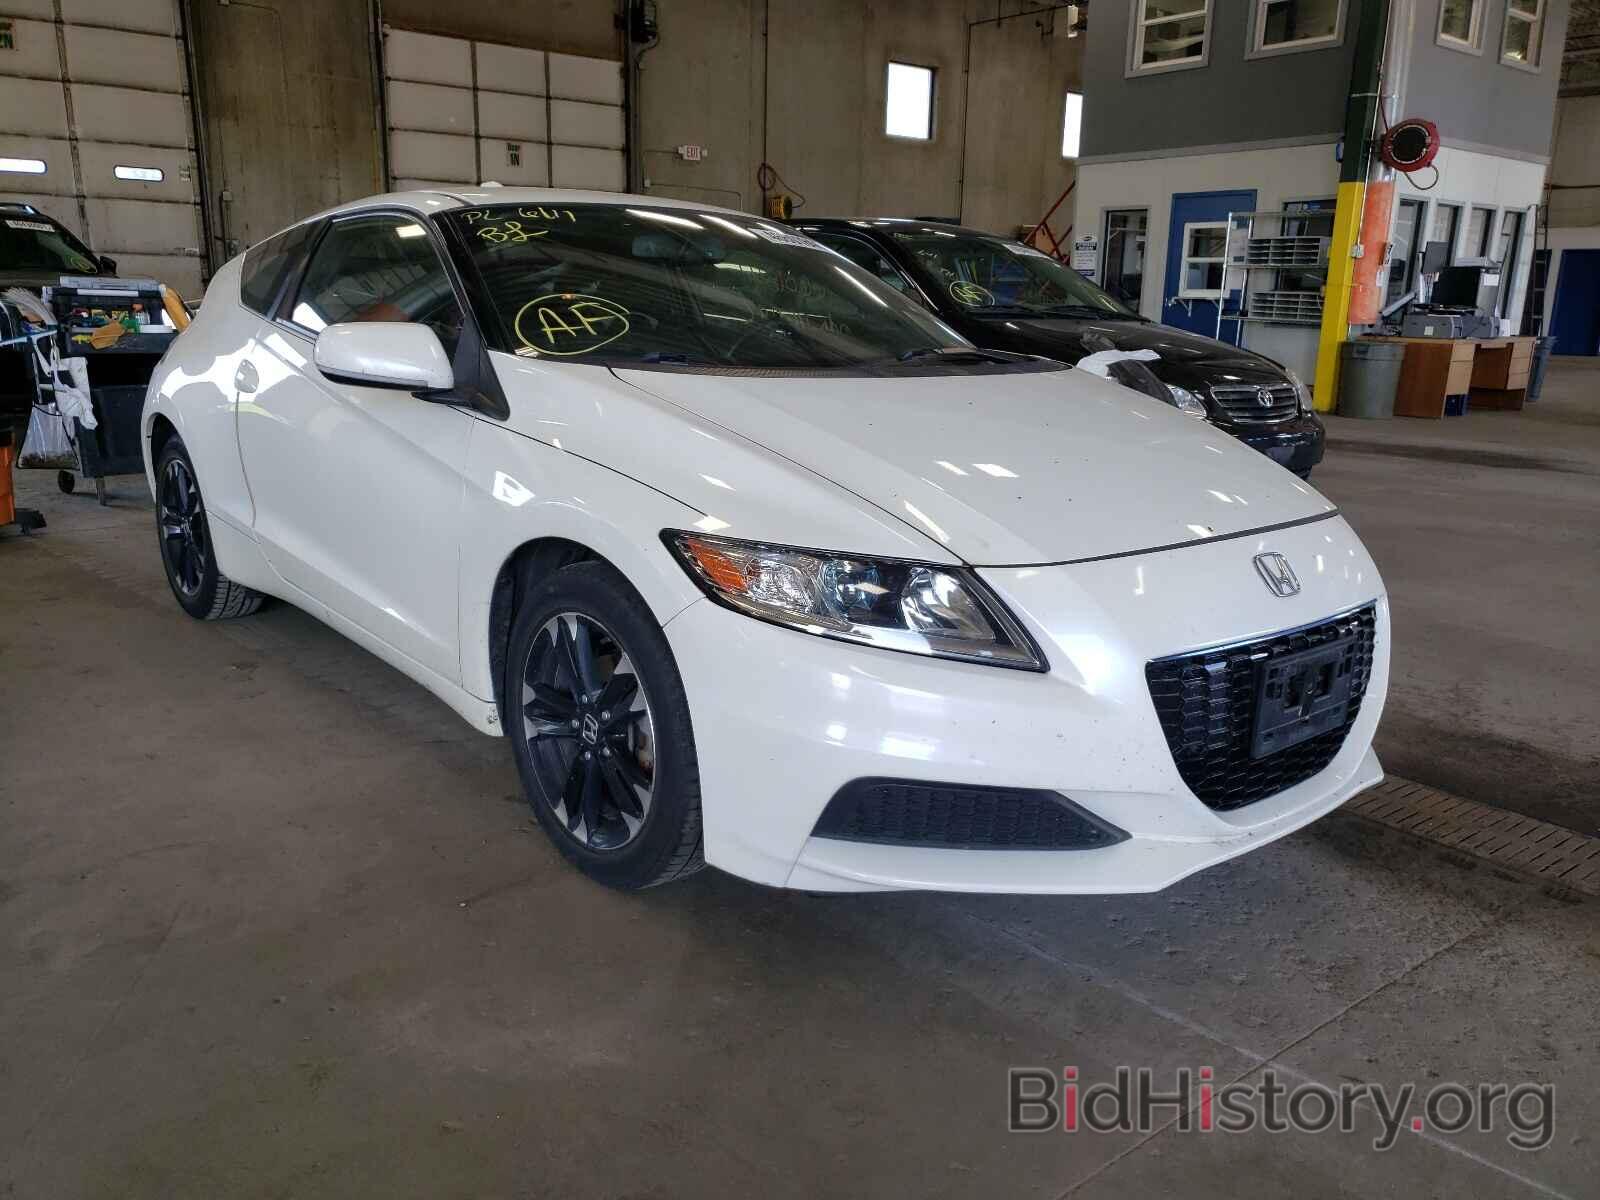 View HONDA CR-Z history at insurance auctions Copart and IAAI 